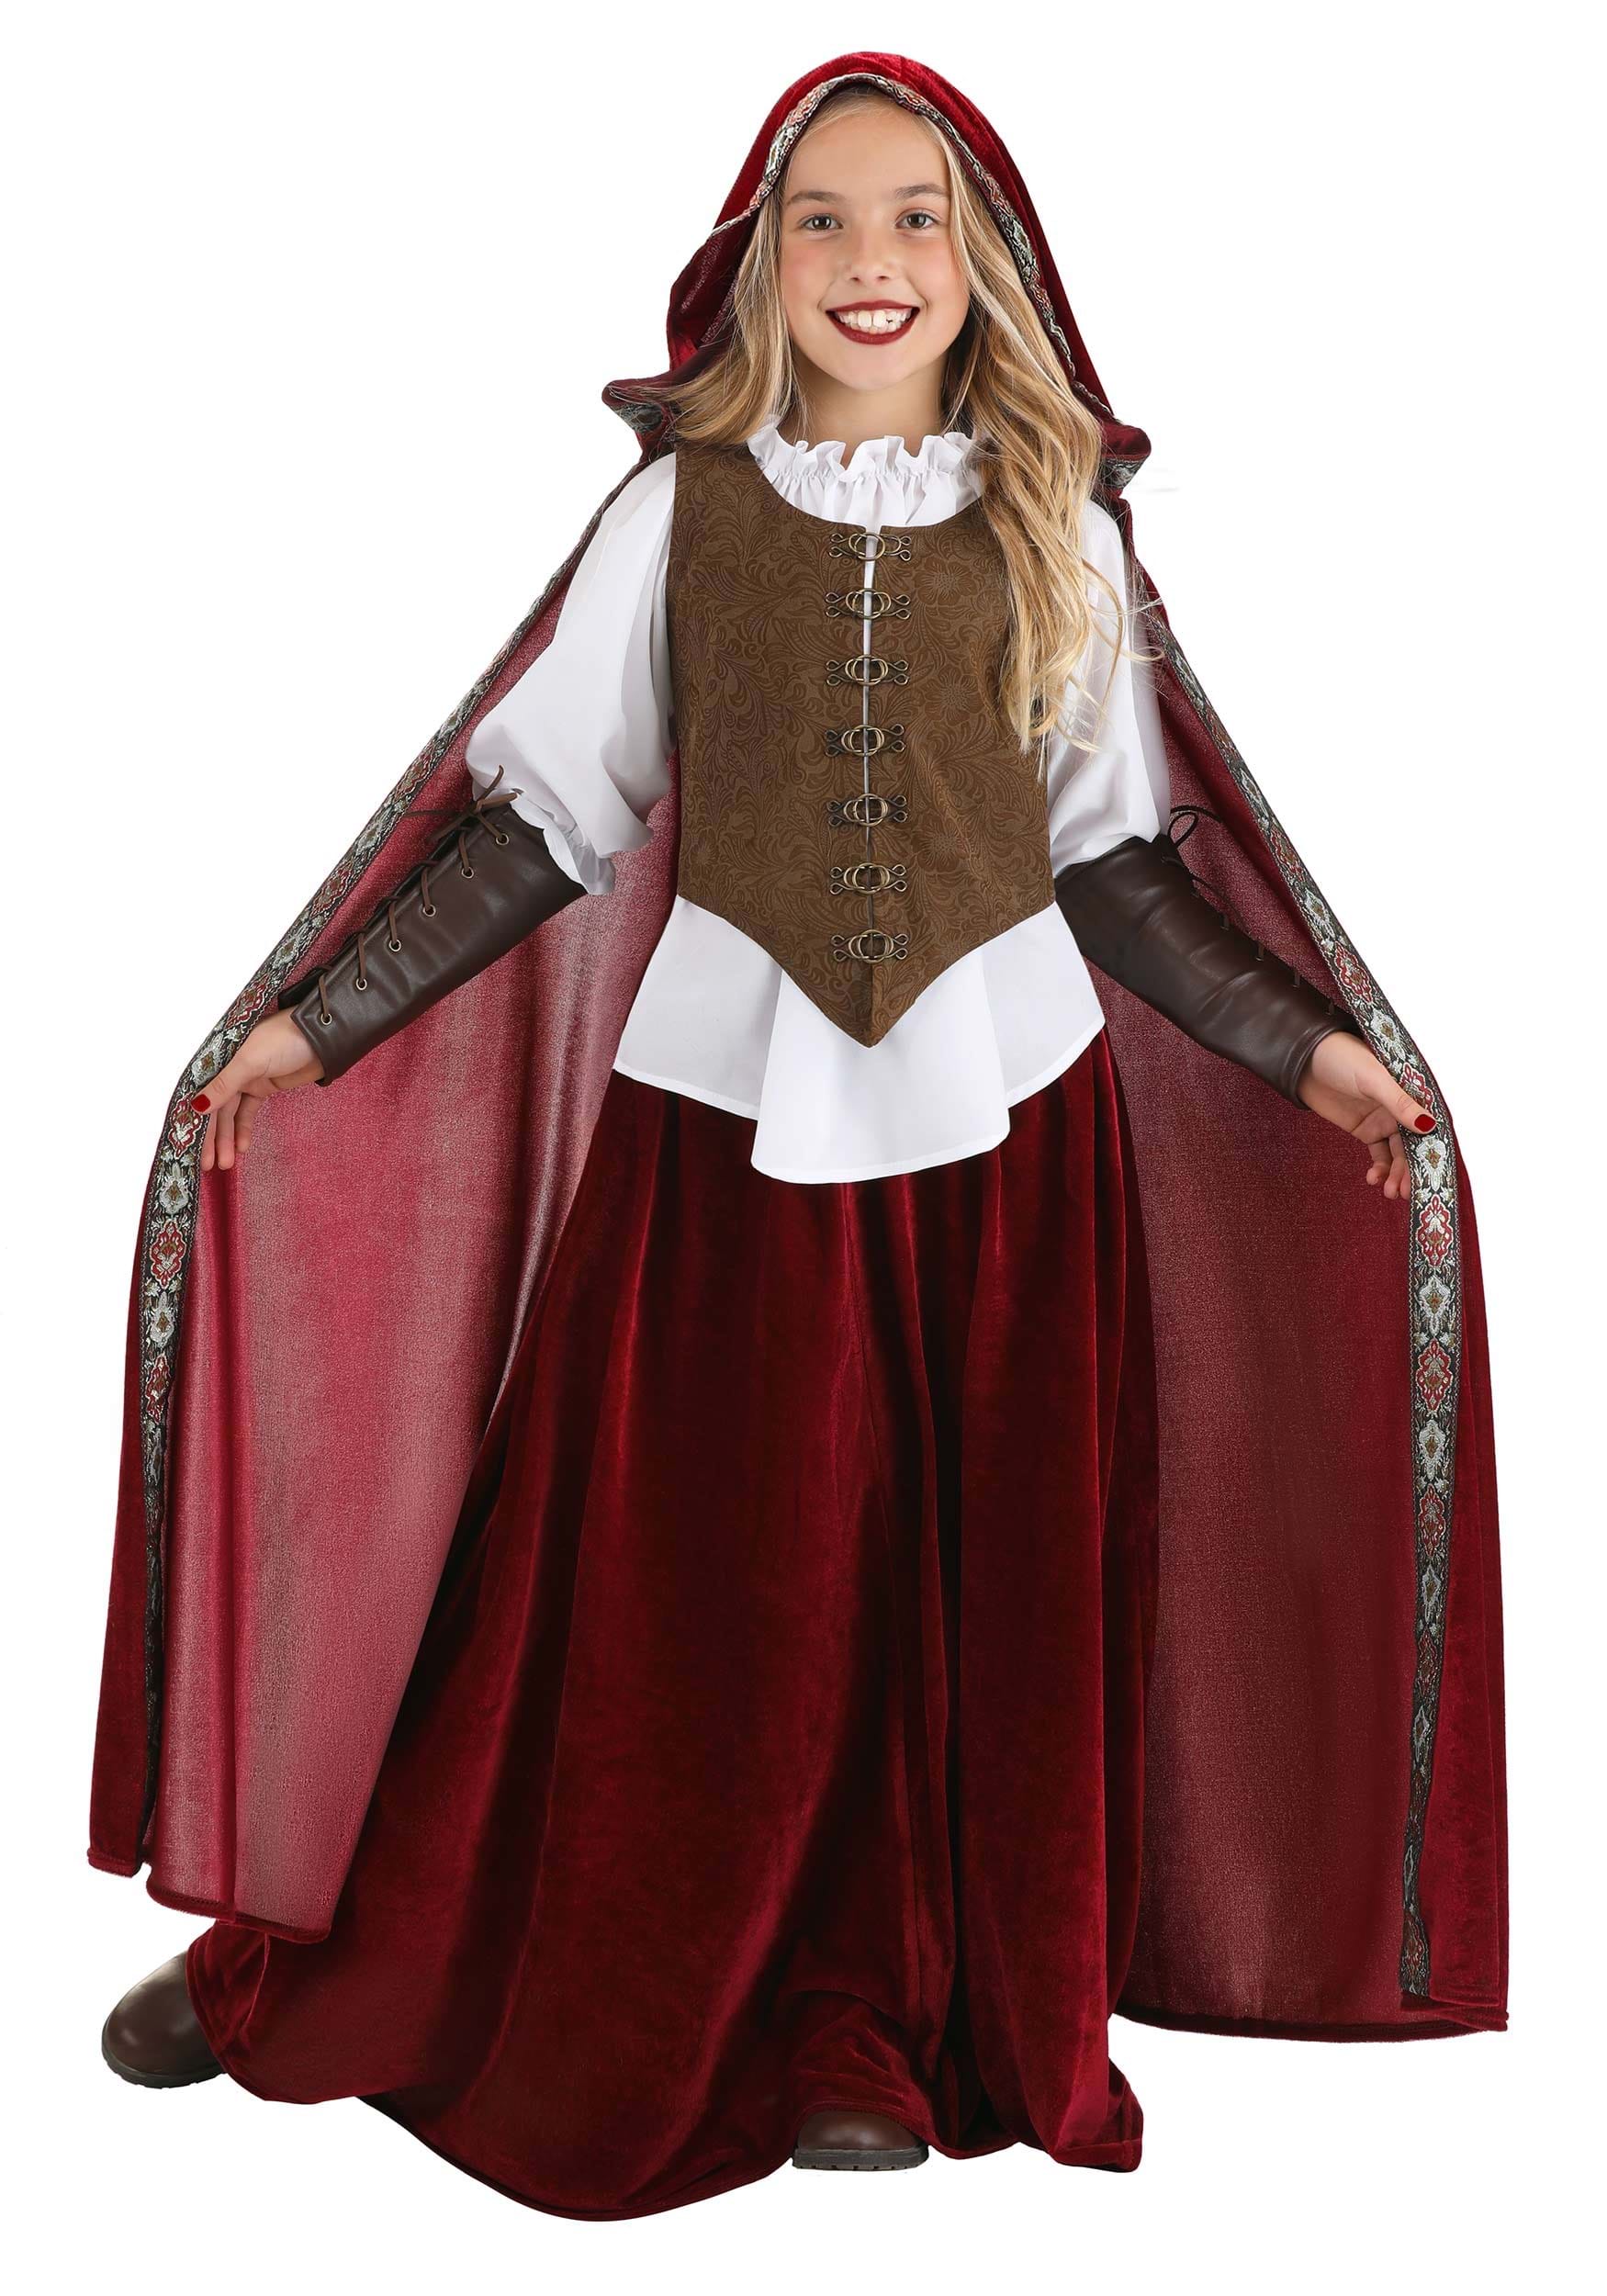 Kid’s Deluxe Red Riding Hood Costume